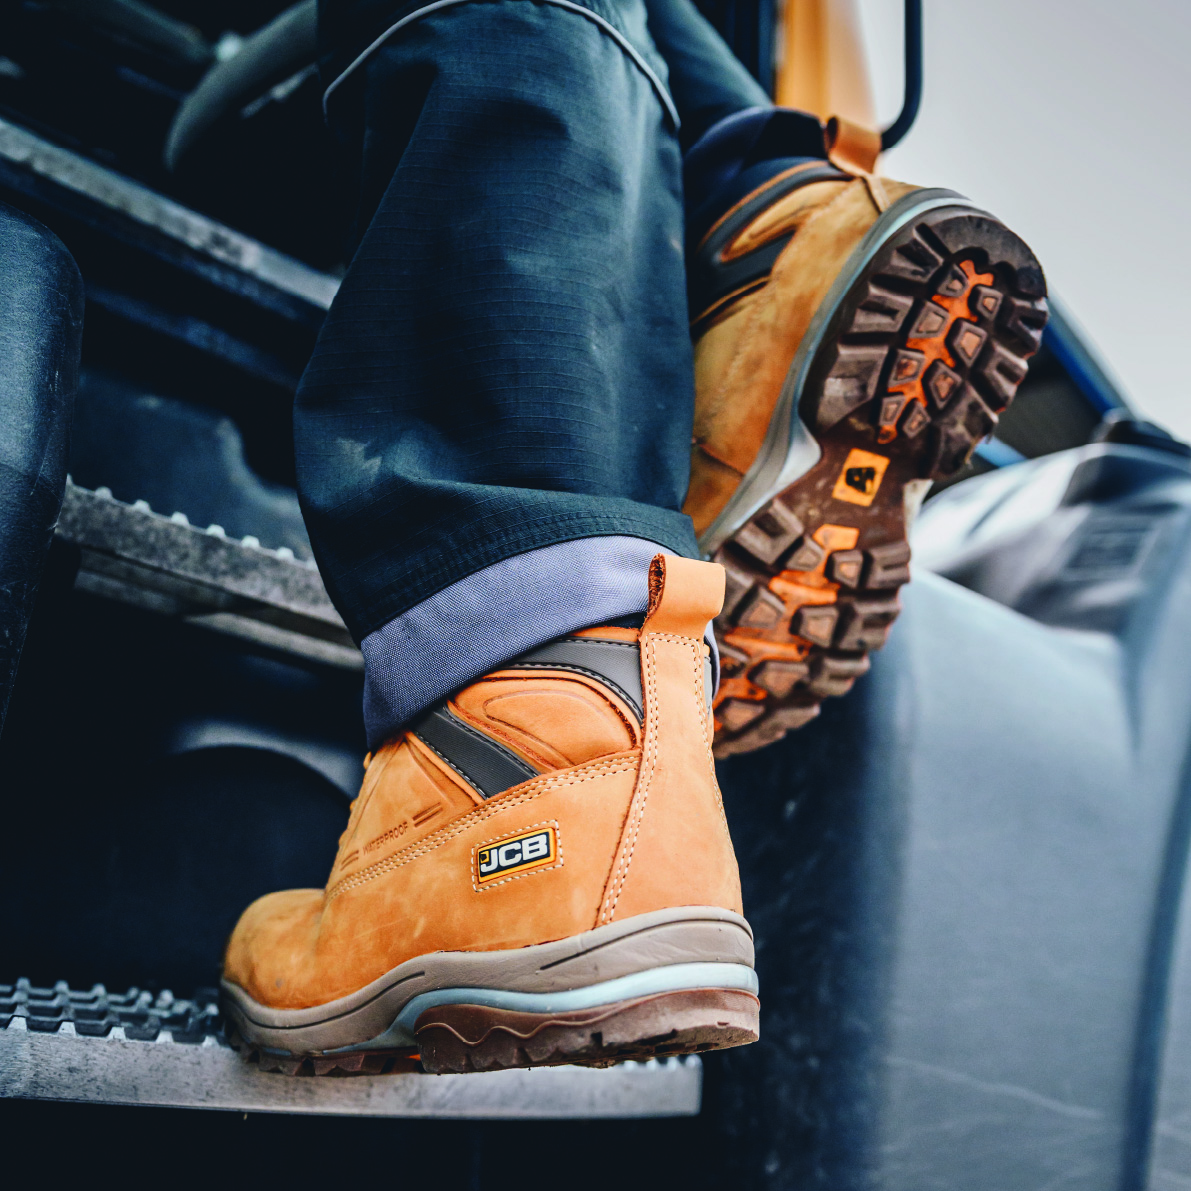 Product Review: The new JCB Fastrac Safety Boots - A Step-Change in ...